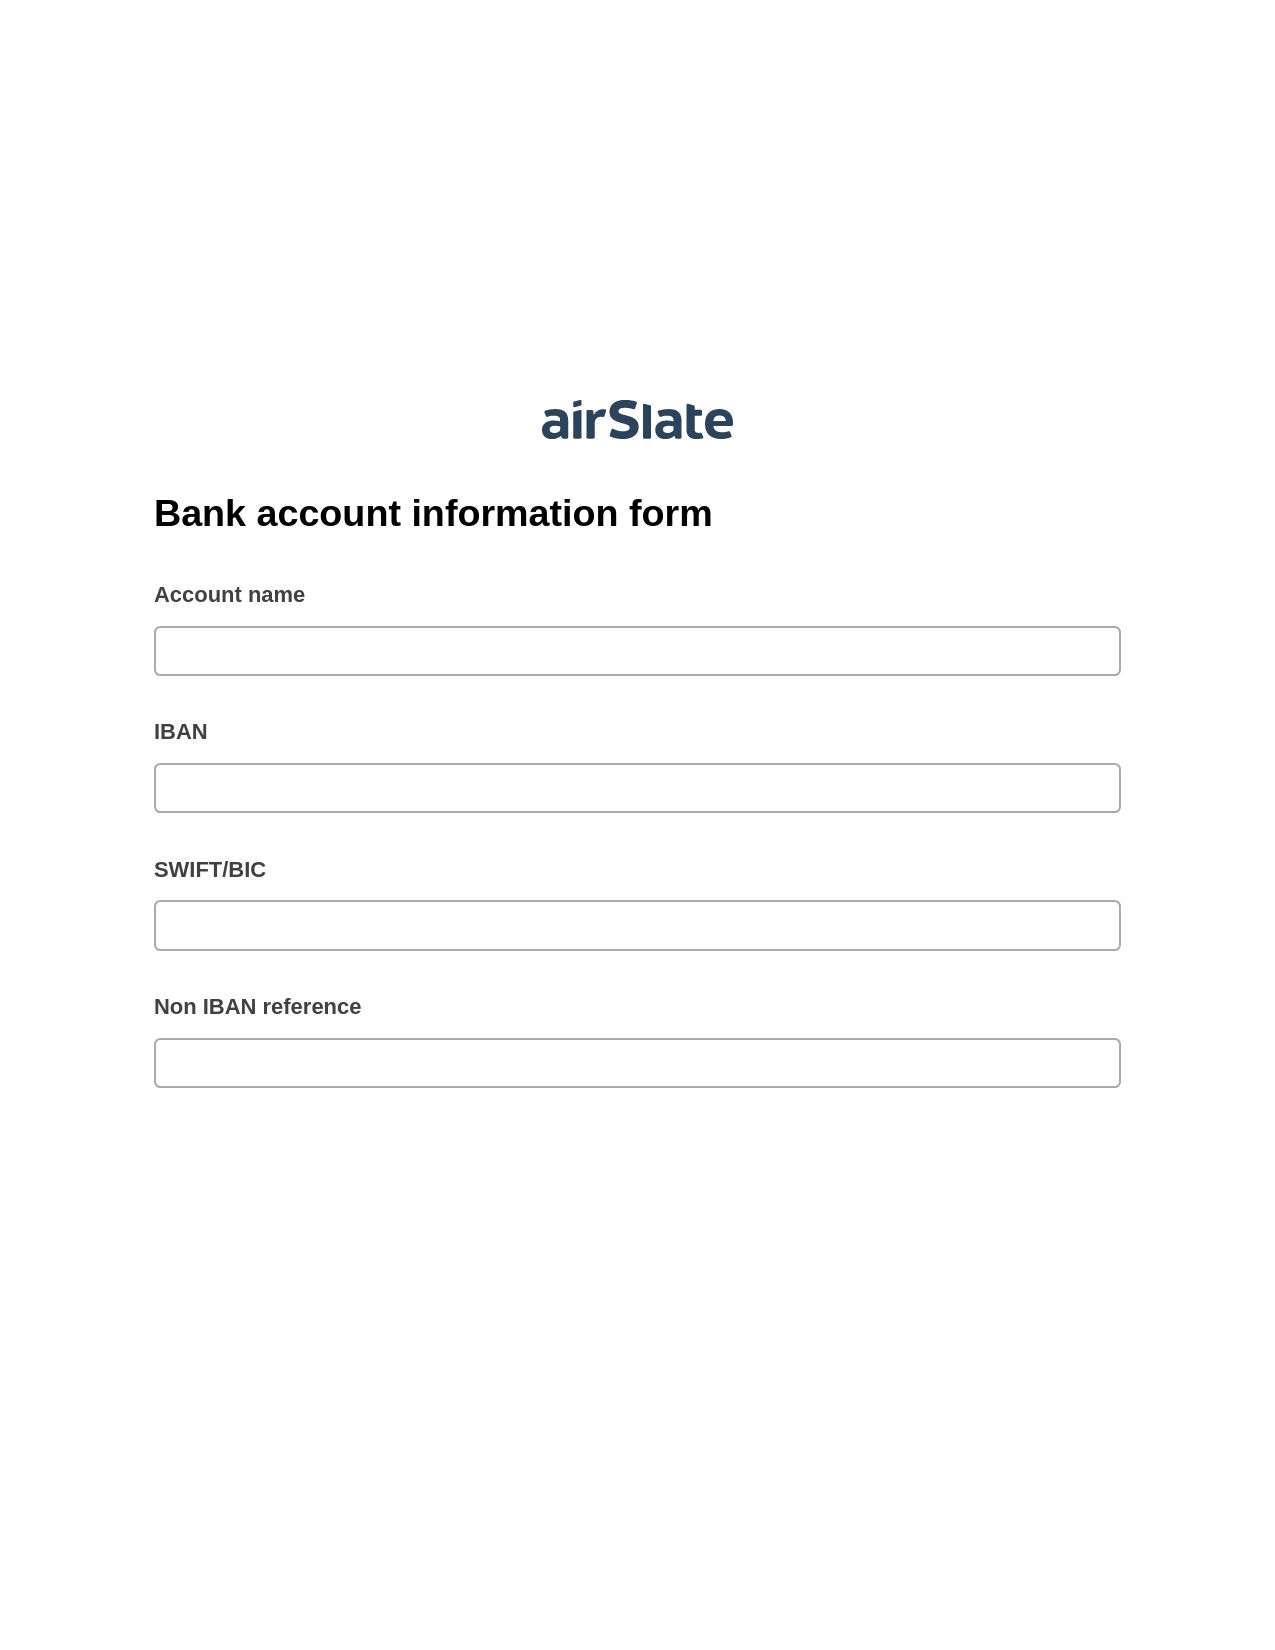 Bank account information form Pre-fill from MySQL Dropdown Options Bot, Assign Slate Name Bot, Export to Google Sheet Bot